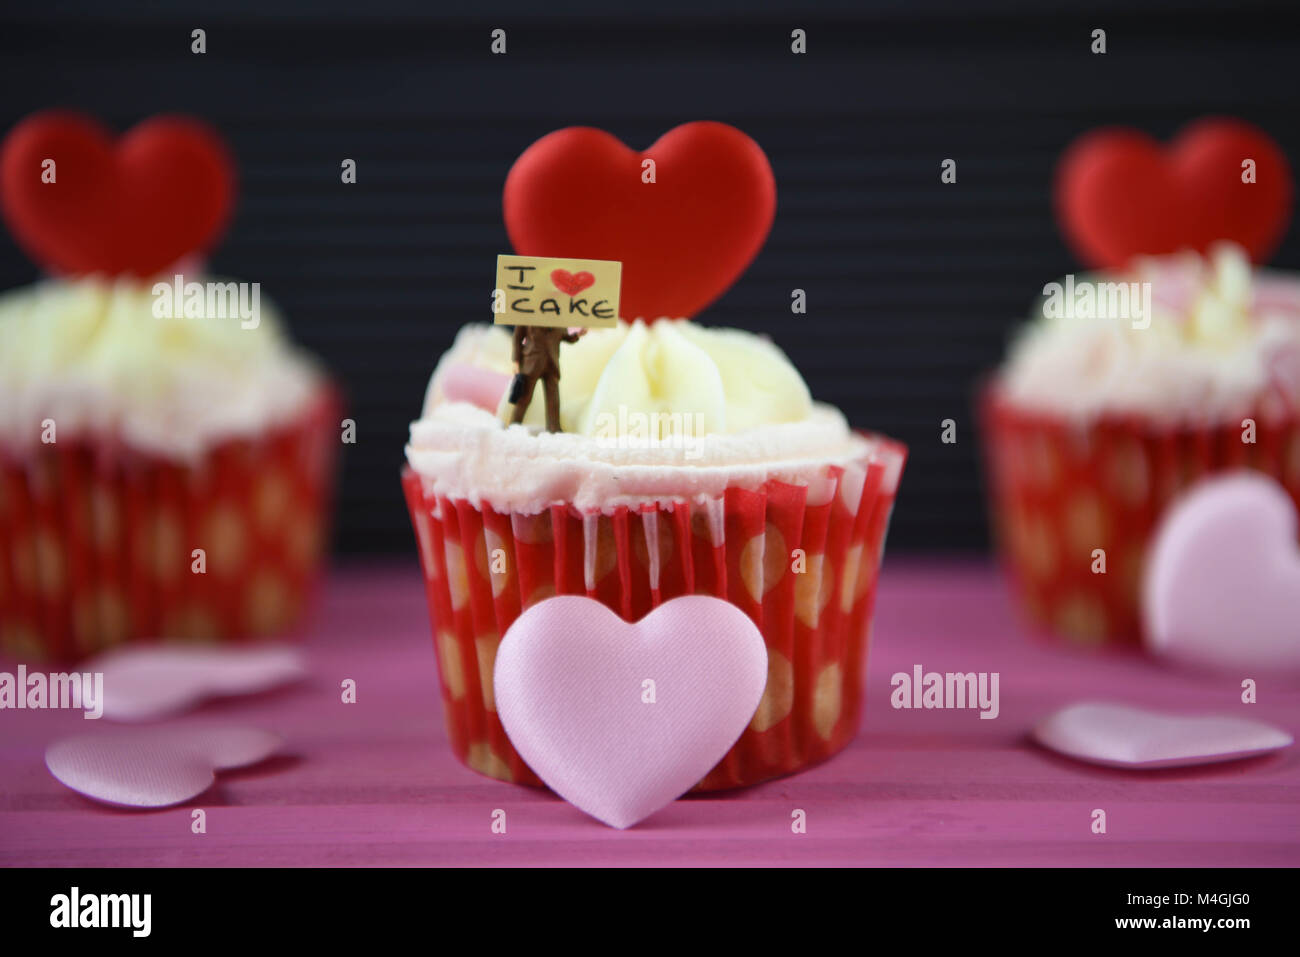 food cupcakes with love heart shapes and miniature sign for i love cake Stock Photo